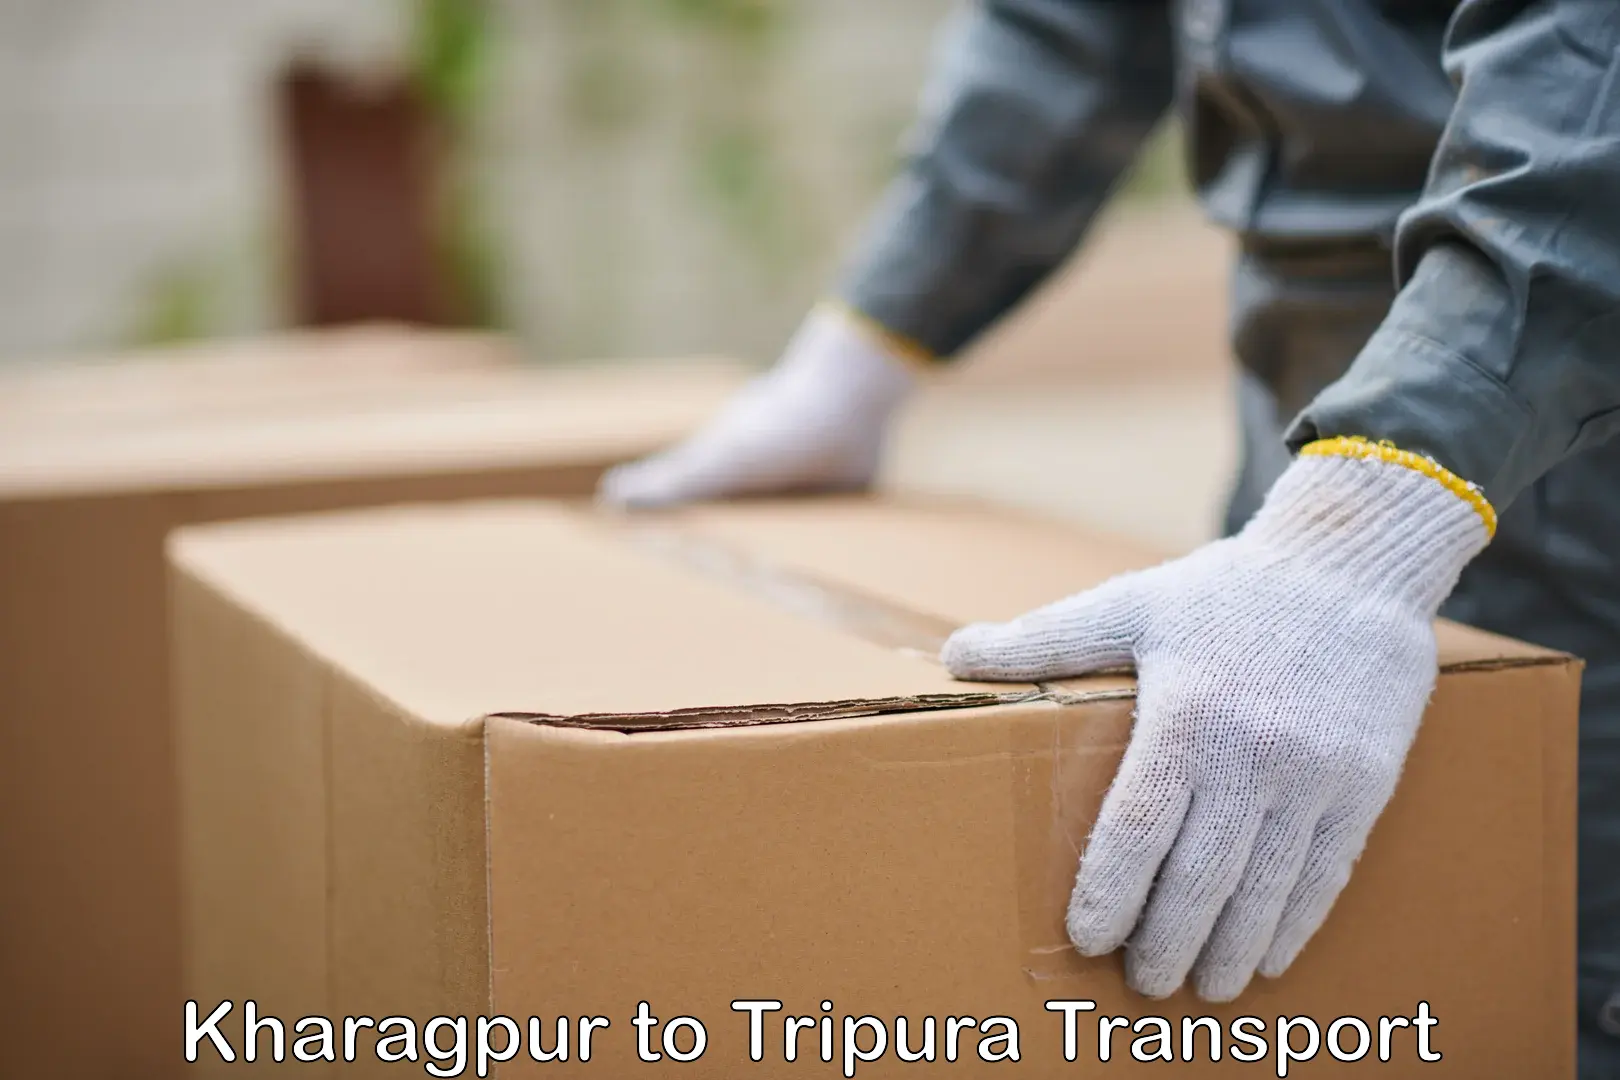 Nationwide transport services in Kharagpur to Udaipur Tripura